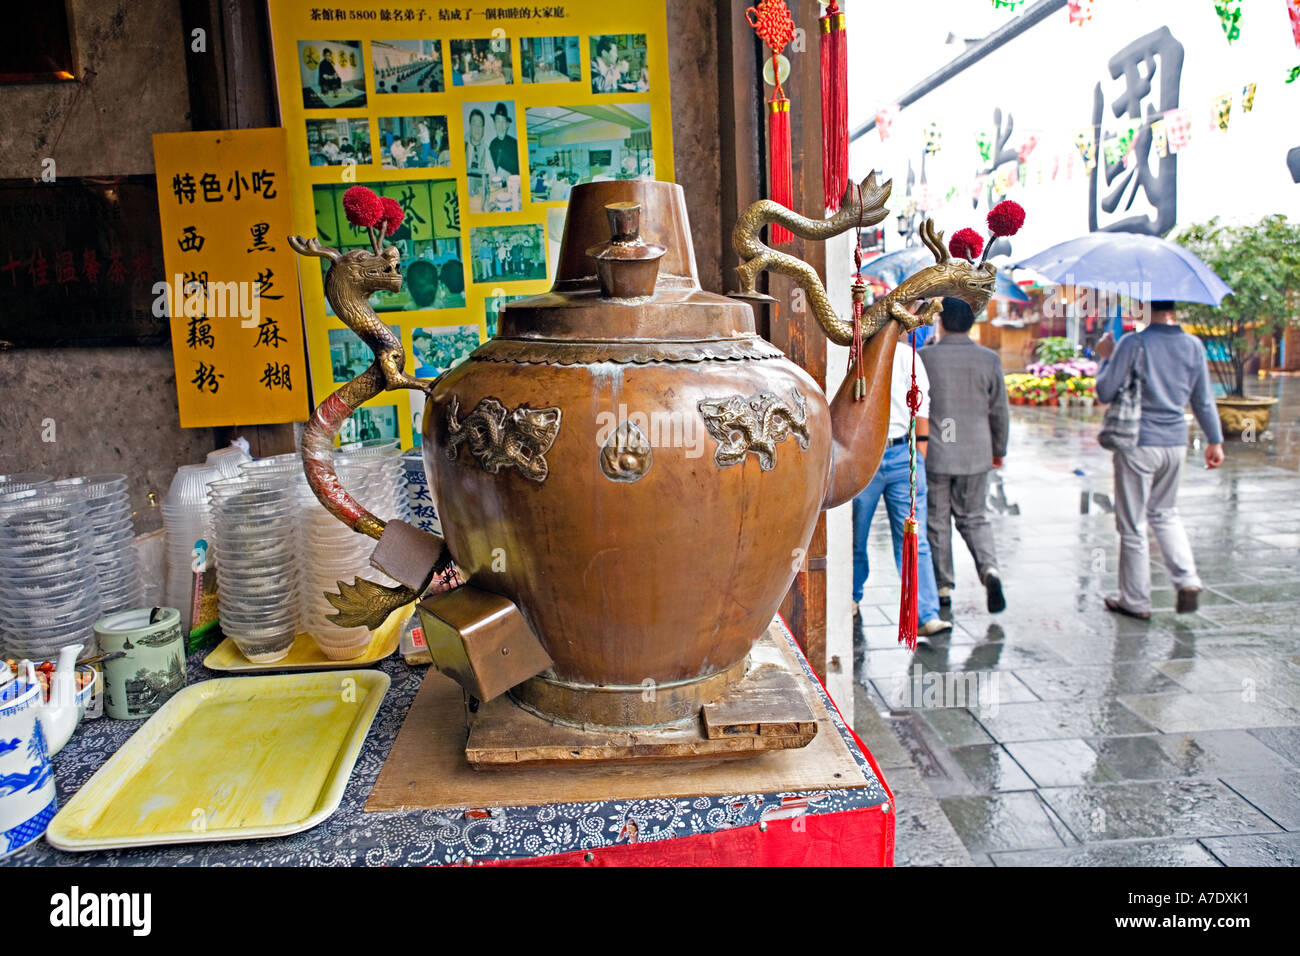 https://c8.alamy.com/comp/A7DXK1/china-hangzhou-giant-antique-copper-teapot-decorated-with-dragons-A7DXK1.jpg